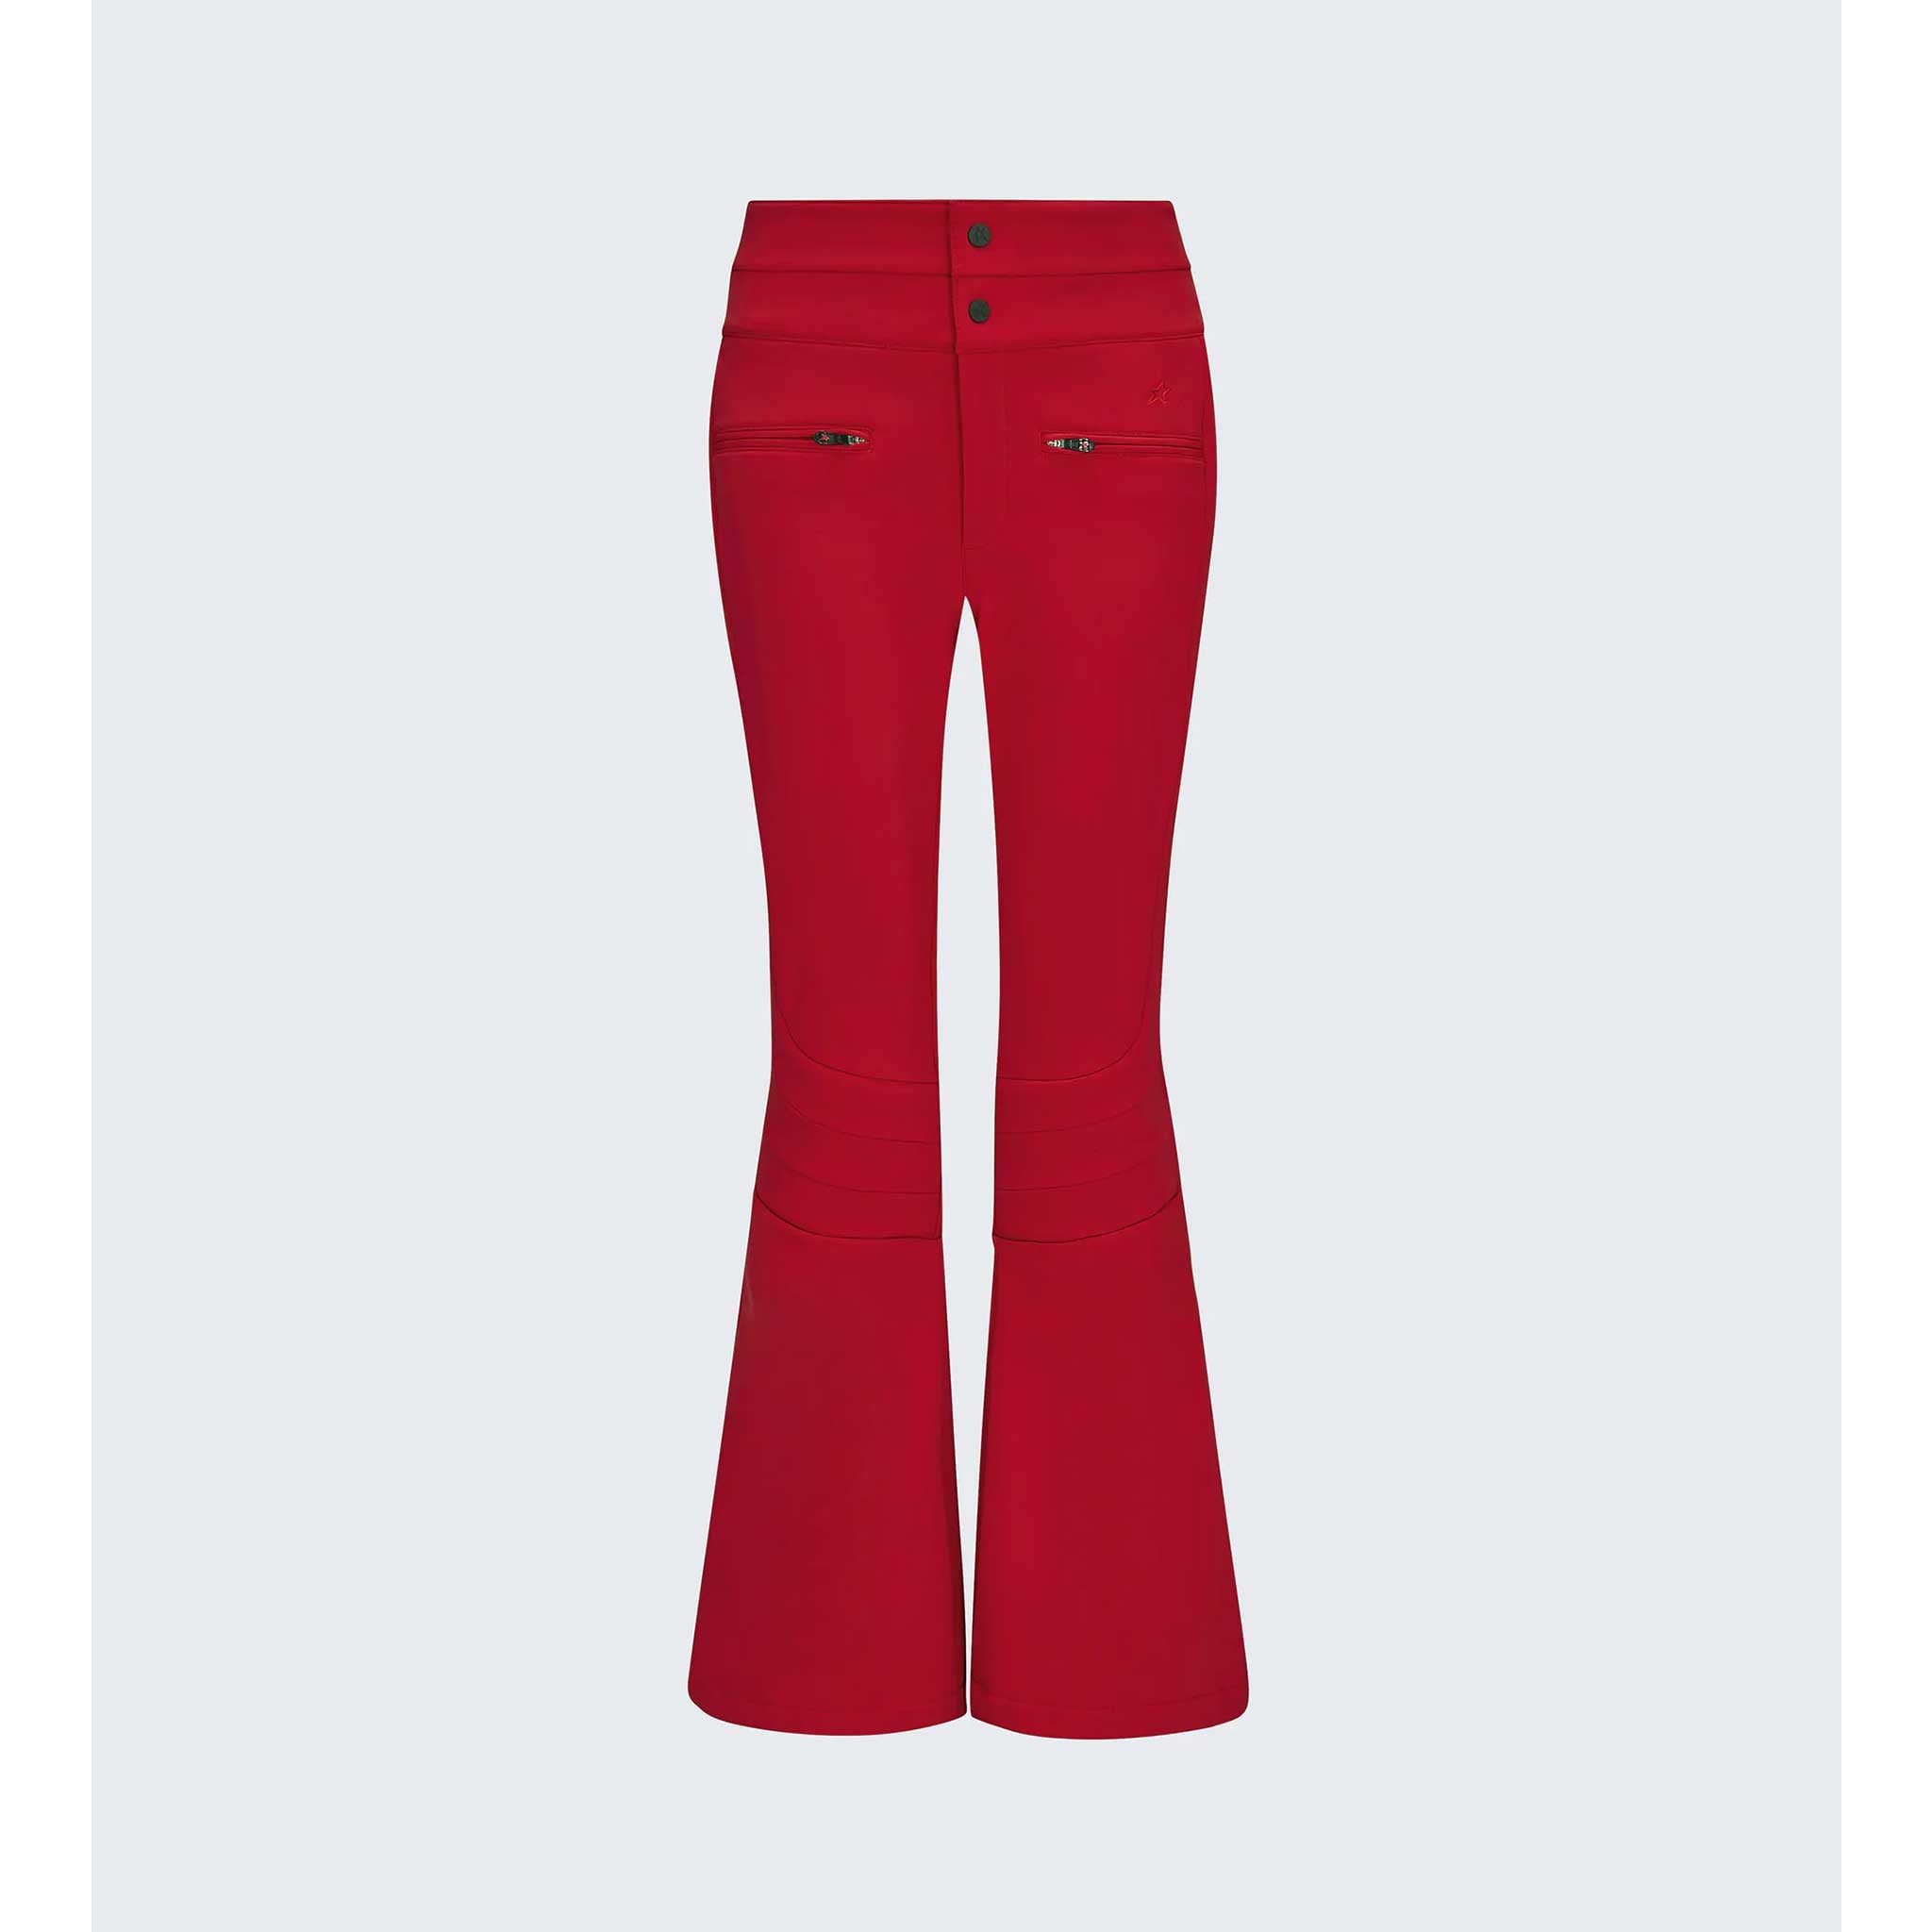 Aurora High Waist Flare Pant in Red